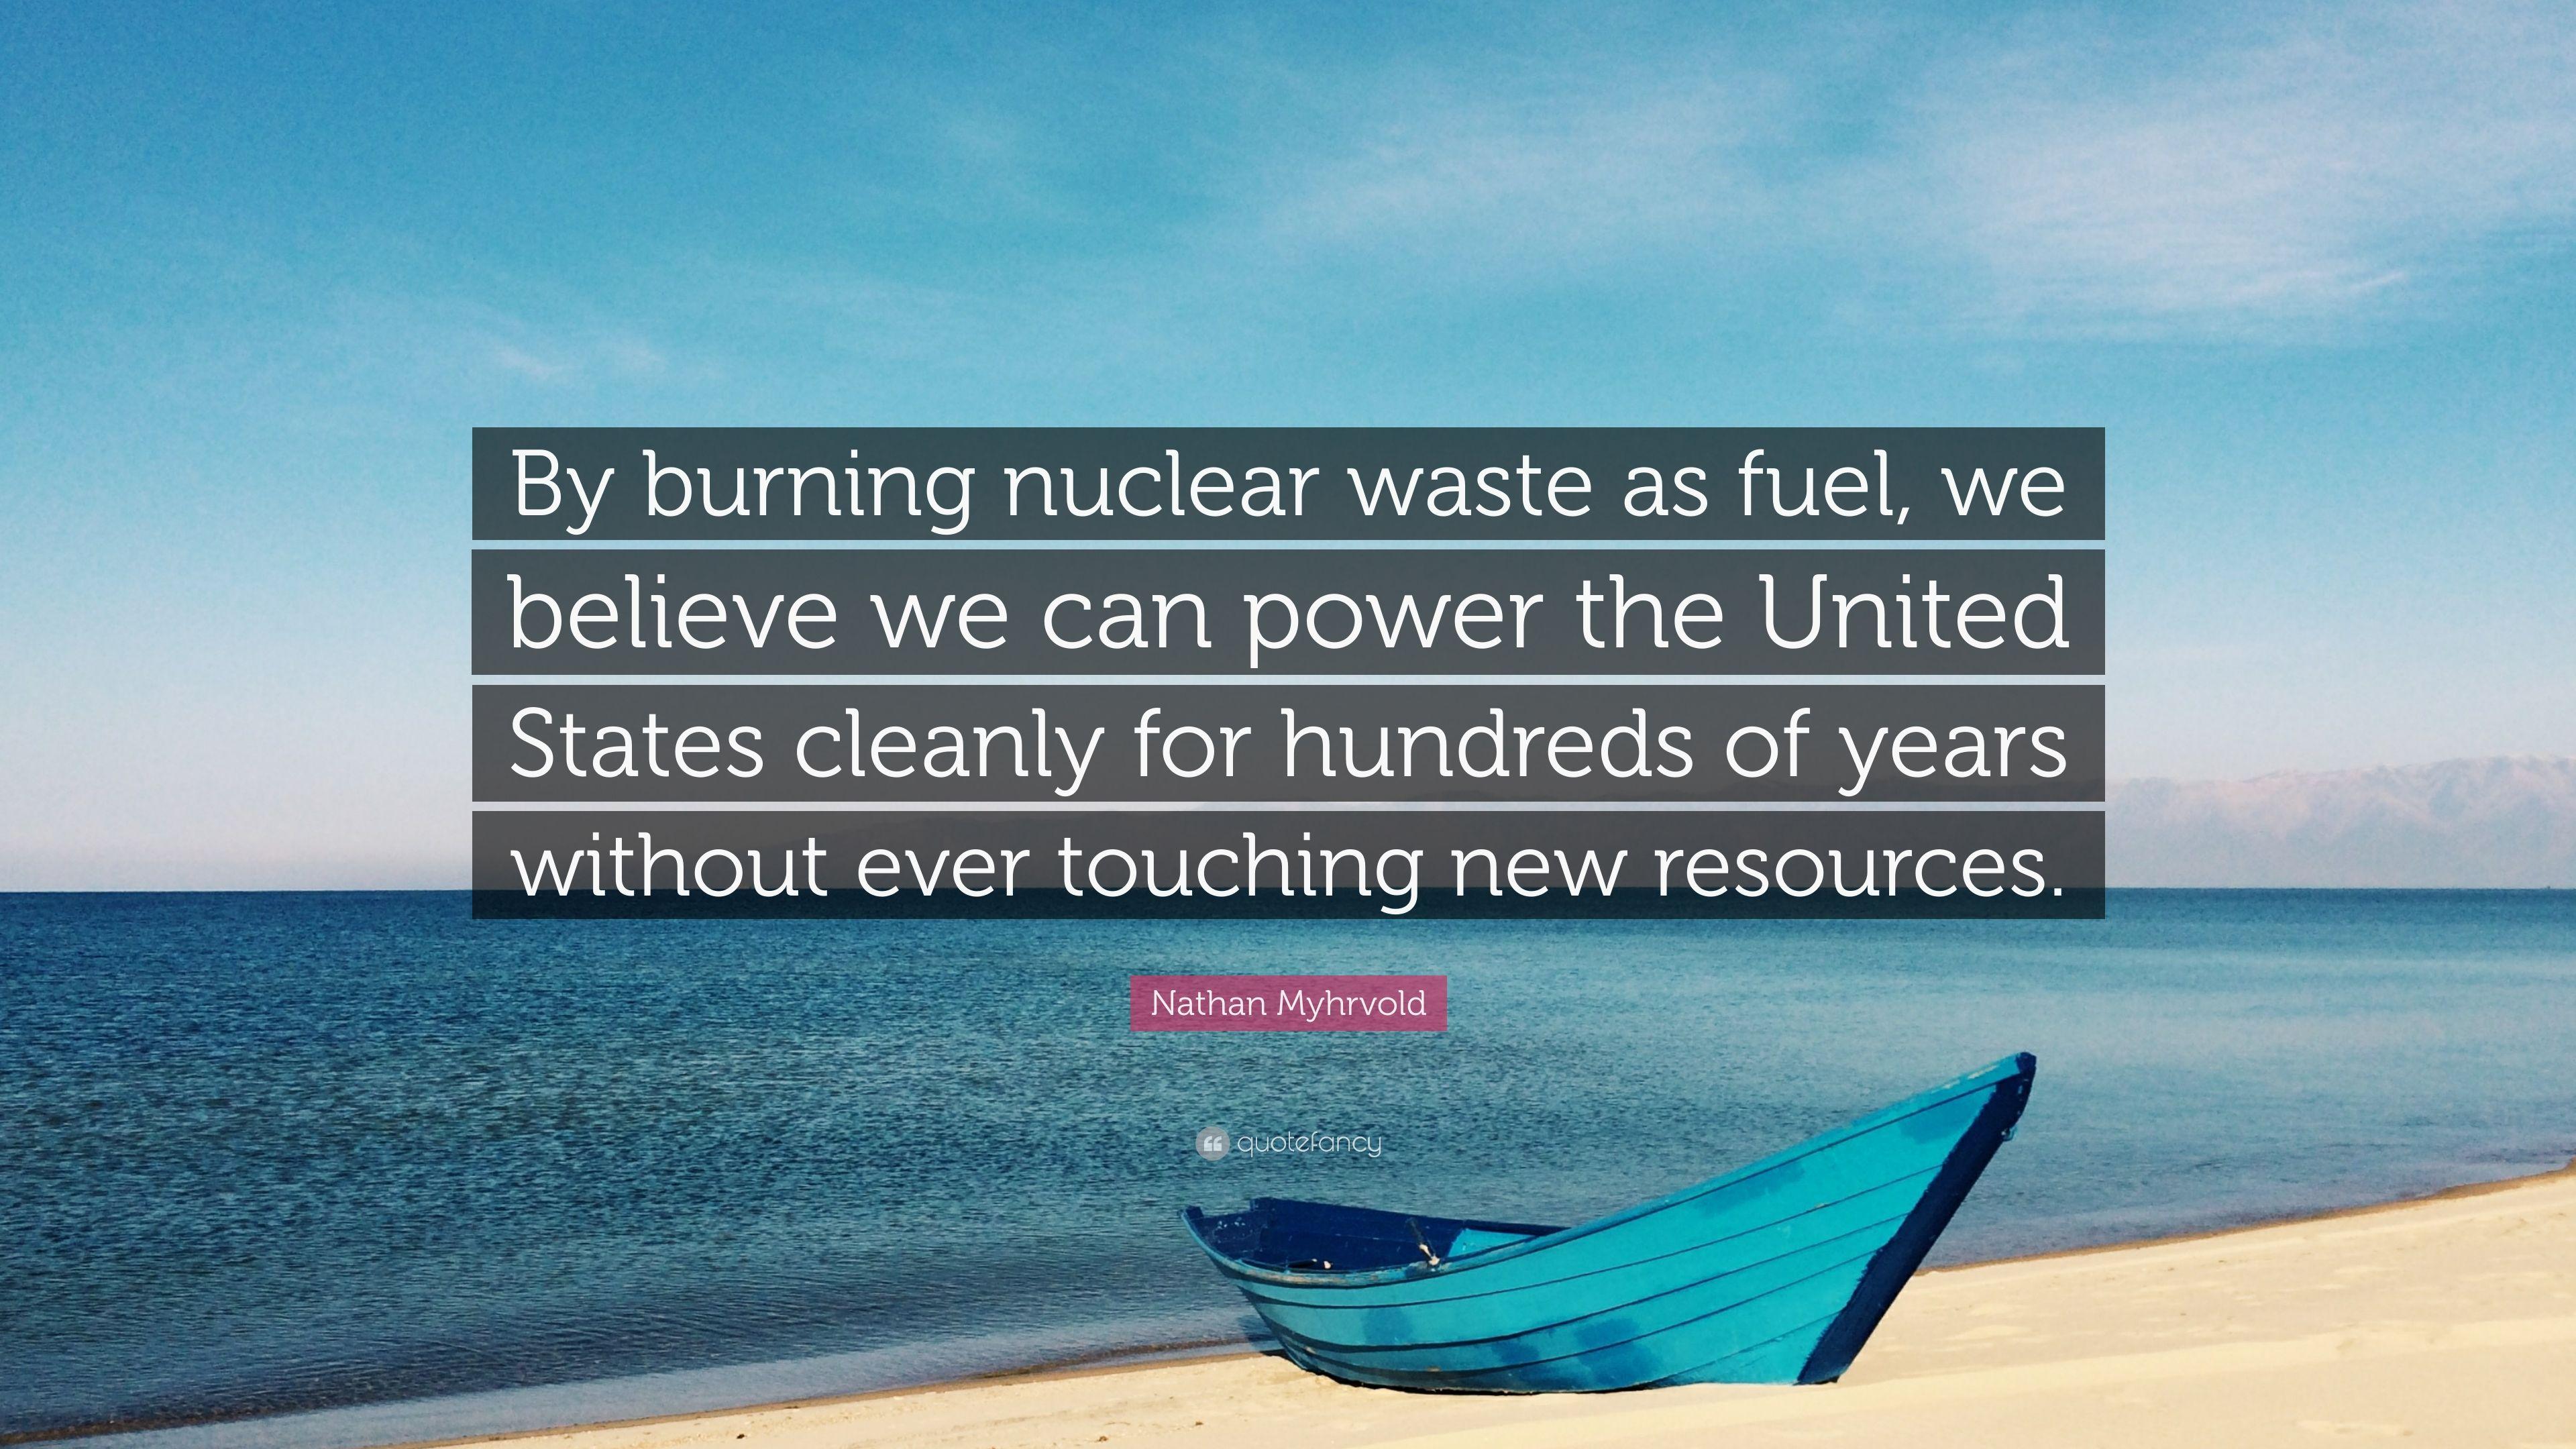 Nathan Myhrvold Quote: “By burning nuclear waste as fuel, we believe